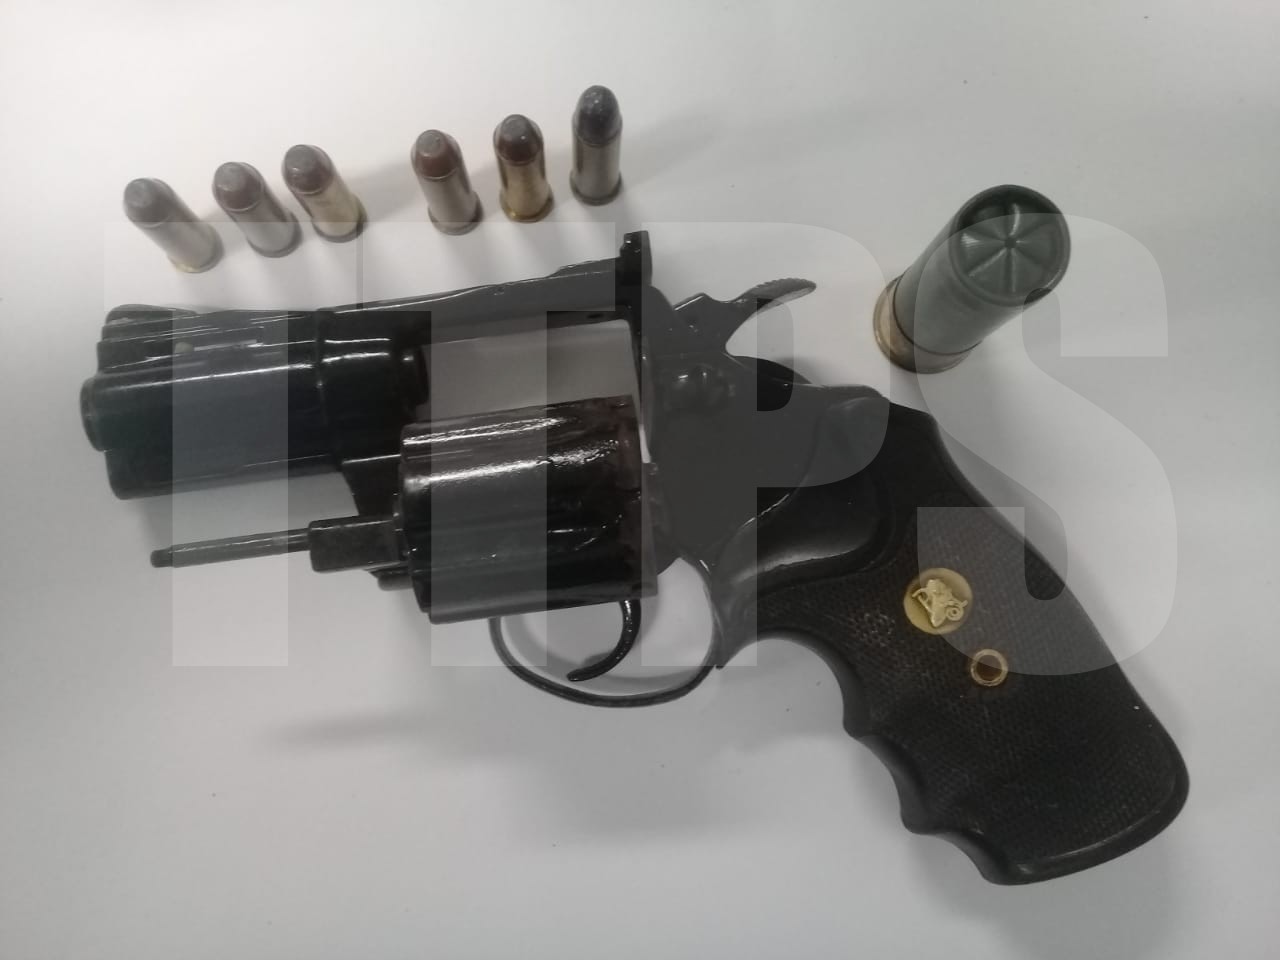 Chaguanas man held with revolver, ammo and Bleached Bills